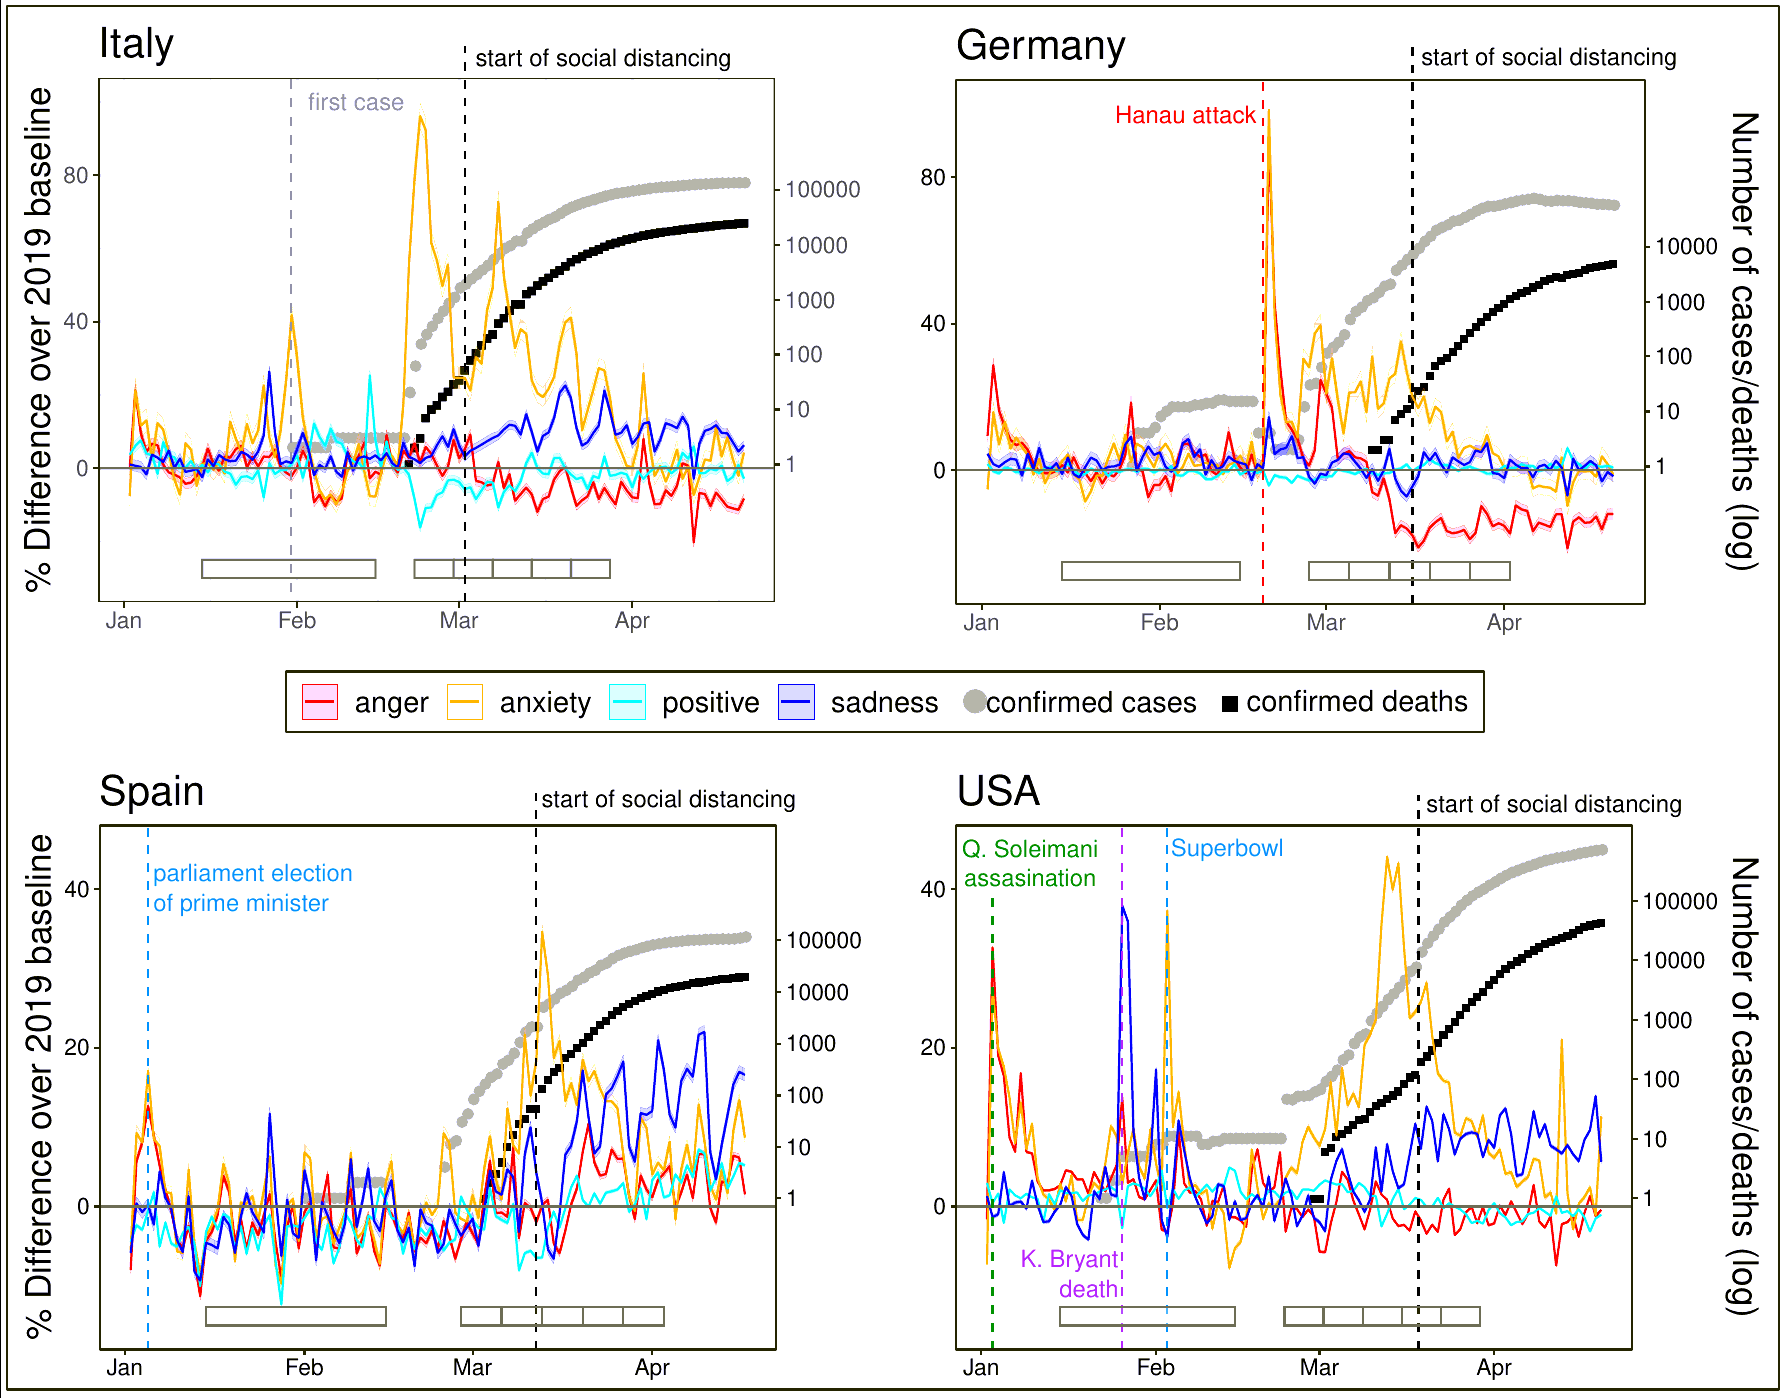 Time series of the level of anxiety, anger, sadness and positive emotion expression compared to the baseline in four selected countries.